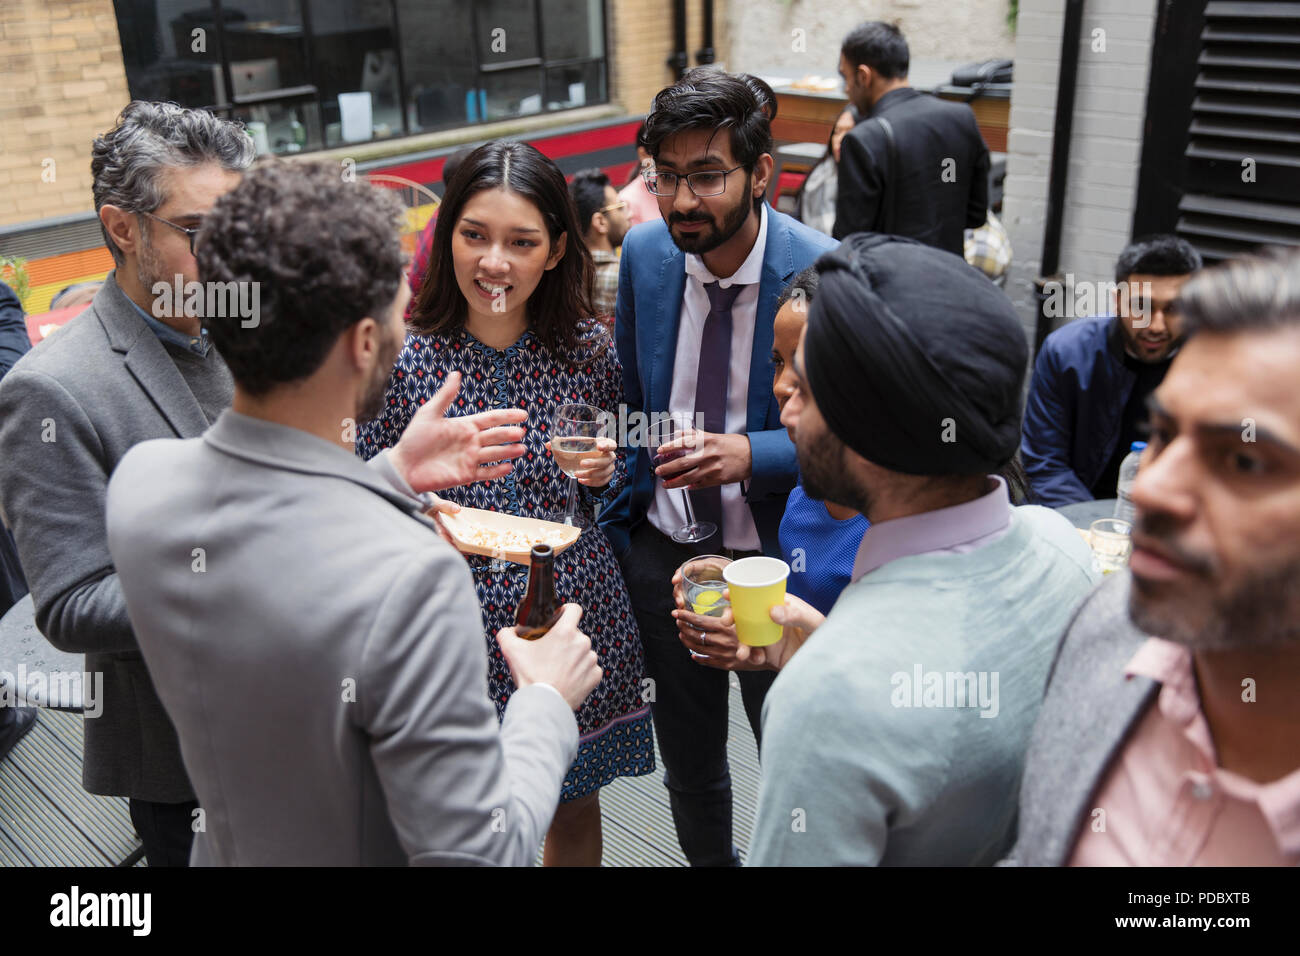 Friends drinking and socializing Stock Photo